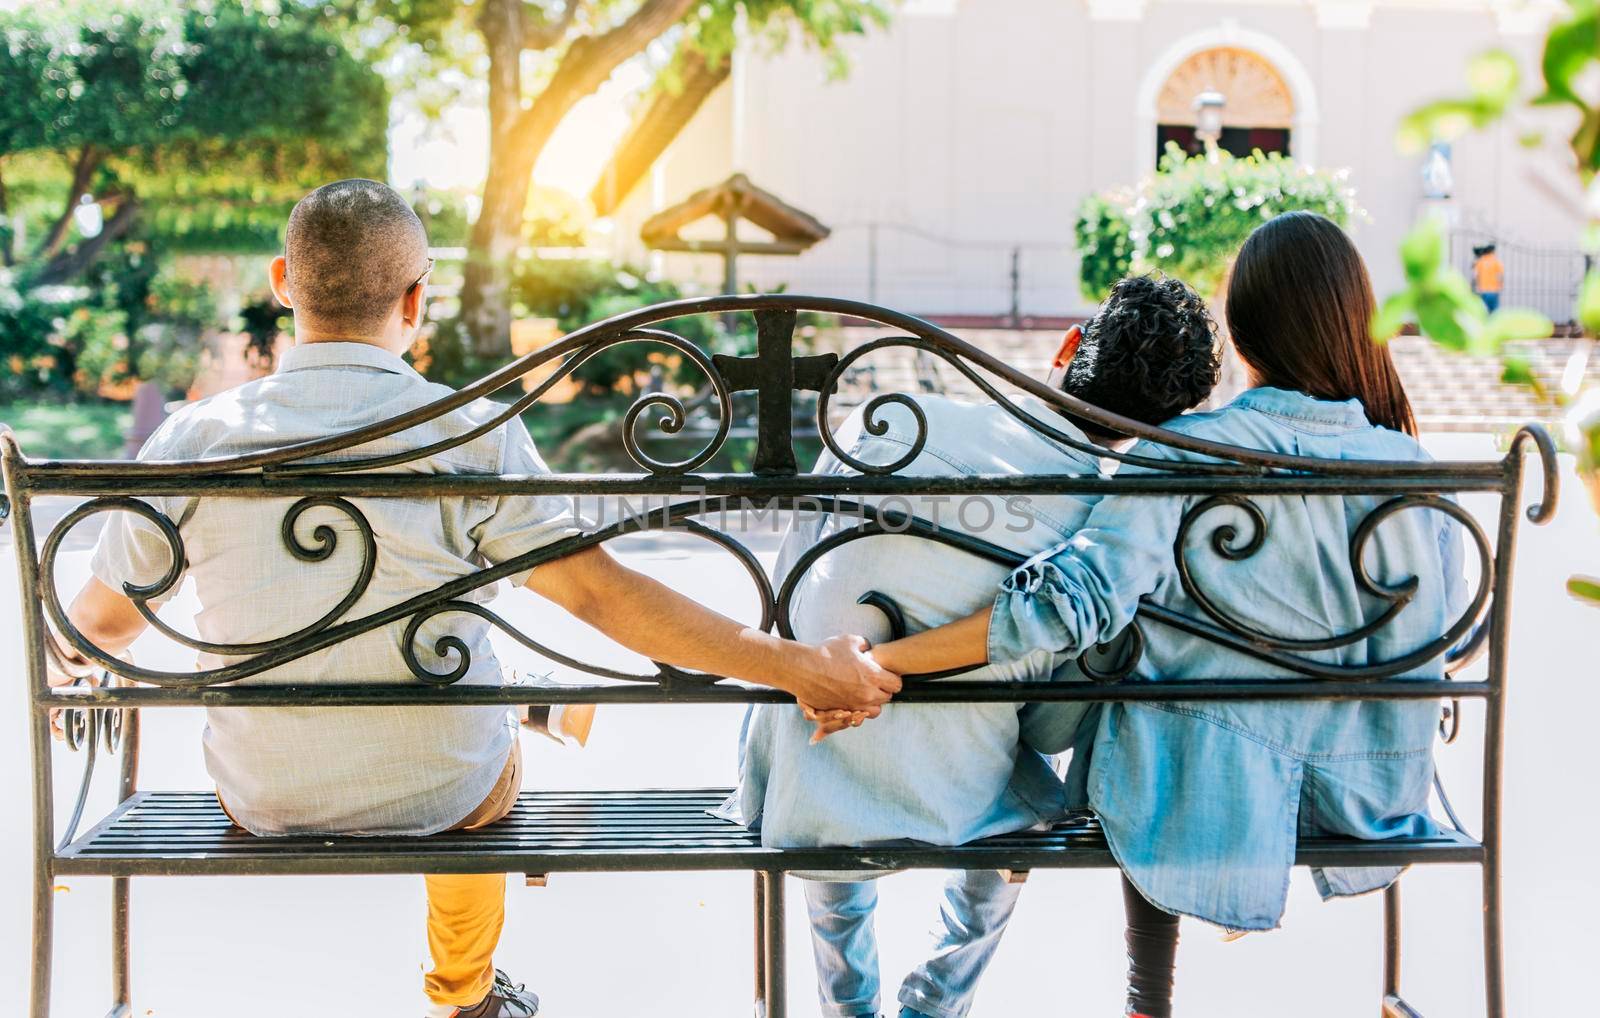 Unfaithful woman sitting holding hands with another man while boyfriend hugs her. Unfaithful couple holding hands on a park bench. Concept of love triangle and infidelity by isaiphoto